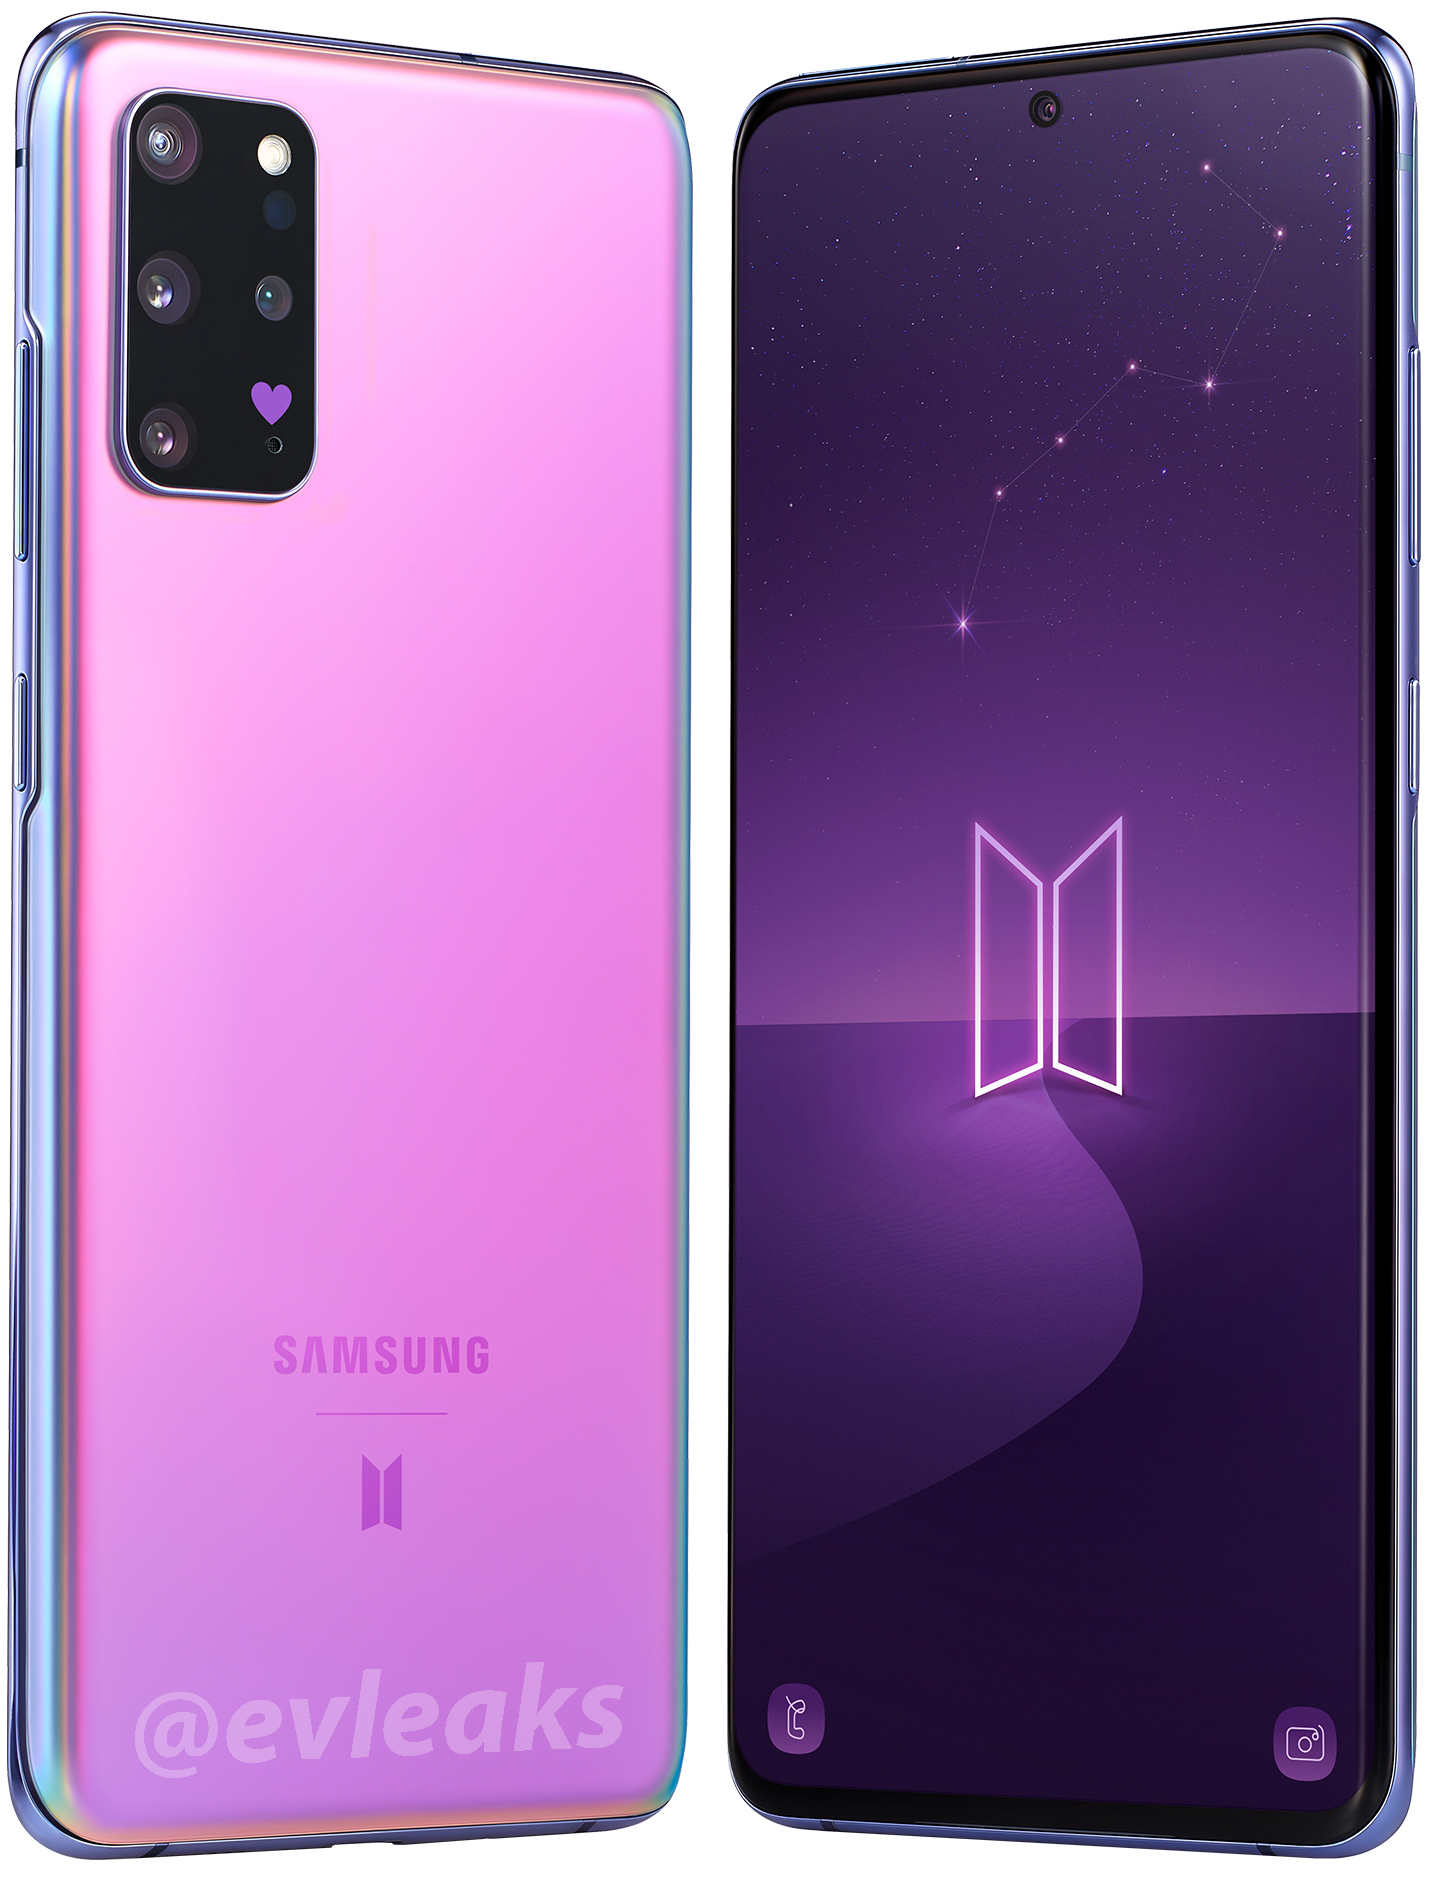 The BTS Edition of the Samsung Galaxy S20+ is coming to Europe